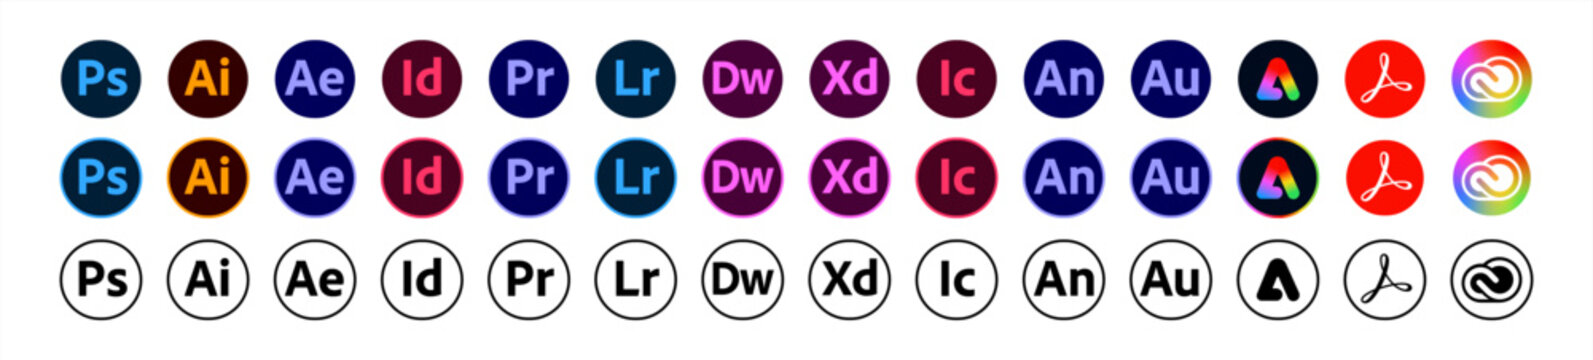 Adobe product. Logotype set of adobe products: adobe, illustrator, photoshop, creative cloud, after effects, lightroom. Vector 10 eps.